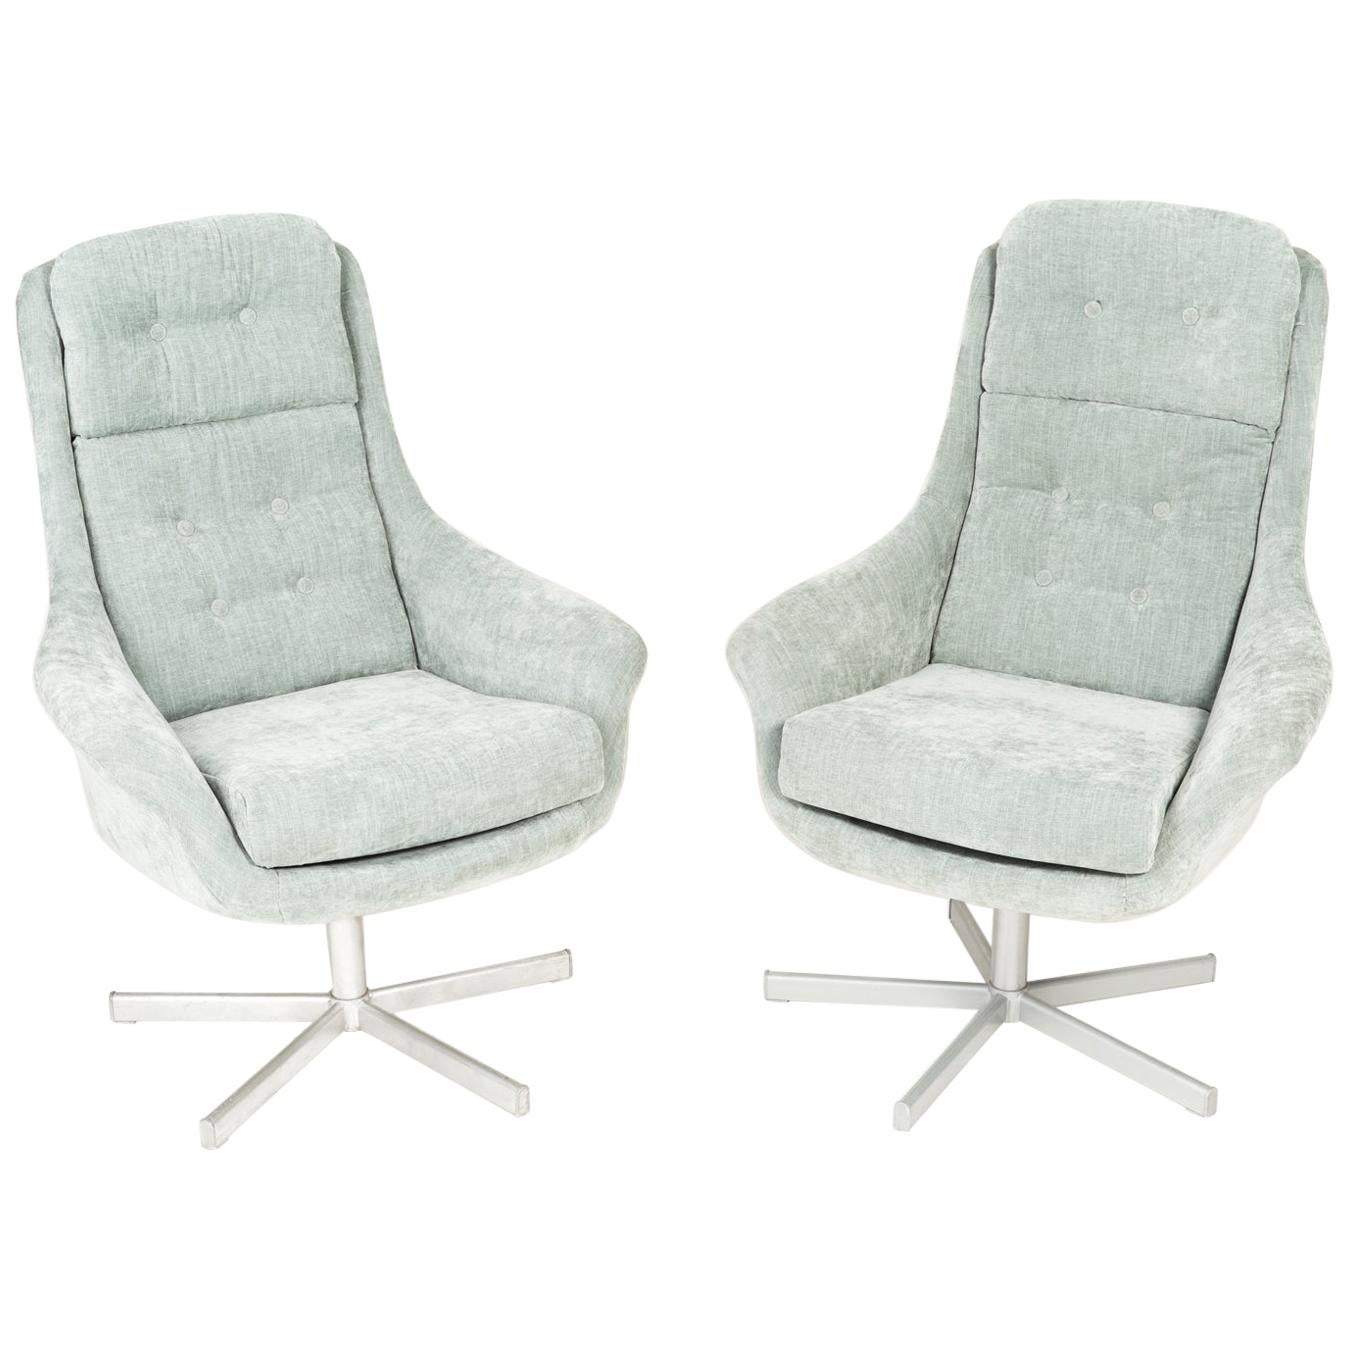 Set of Two 20th Century Vintage Light Green Swivel Armchairs, 1960s For Sale